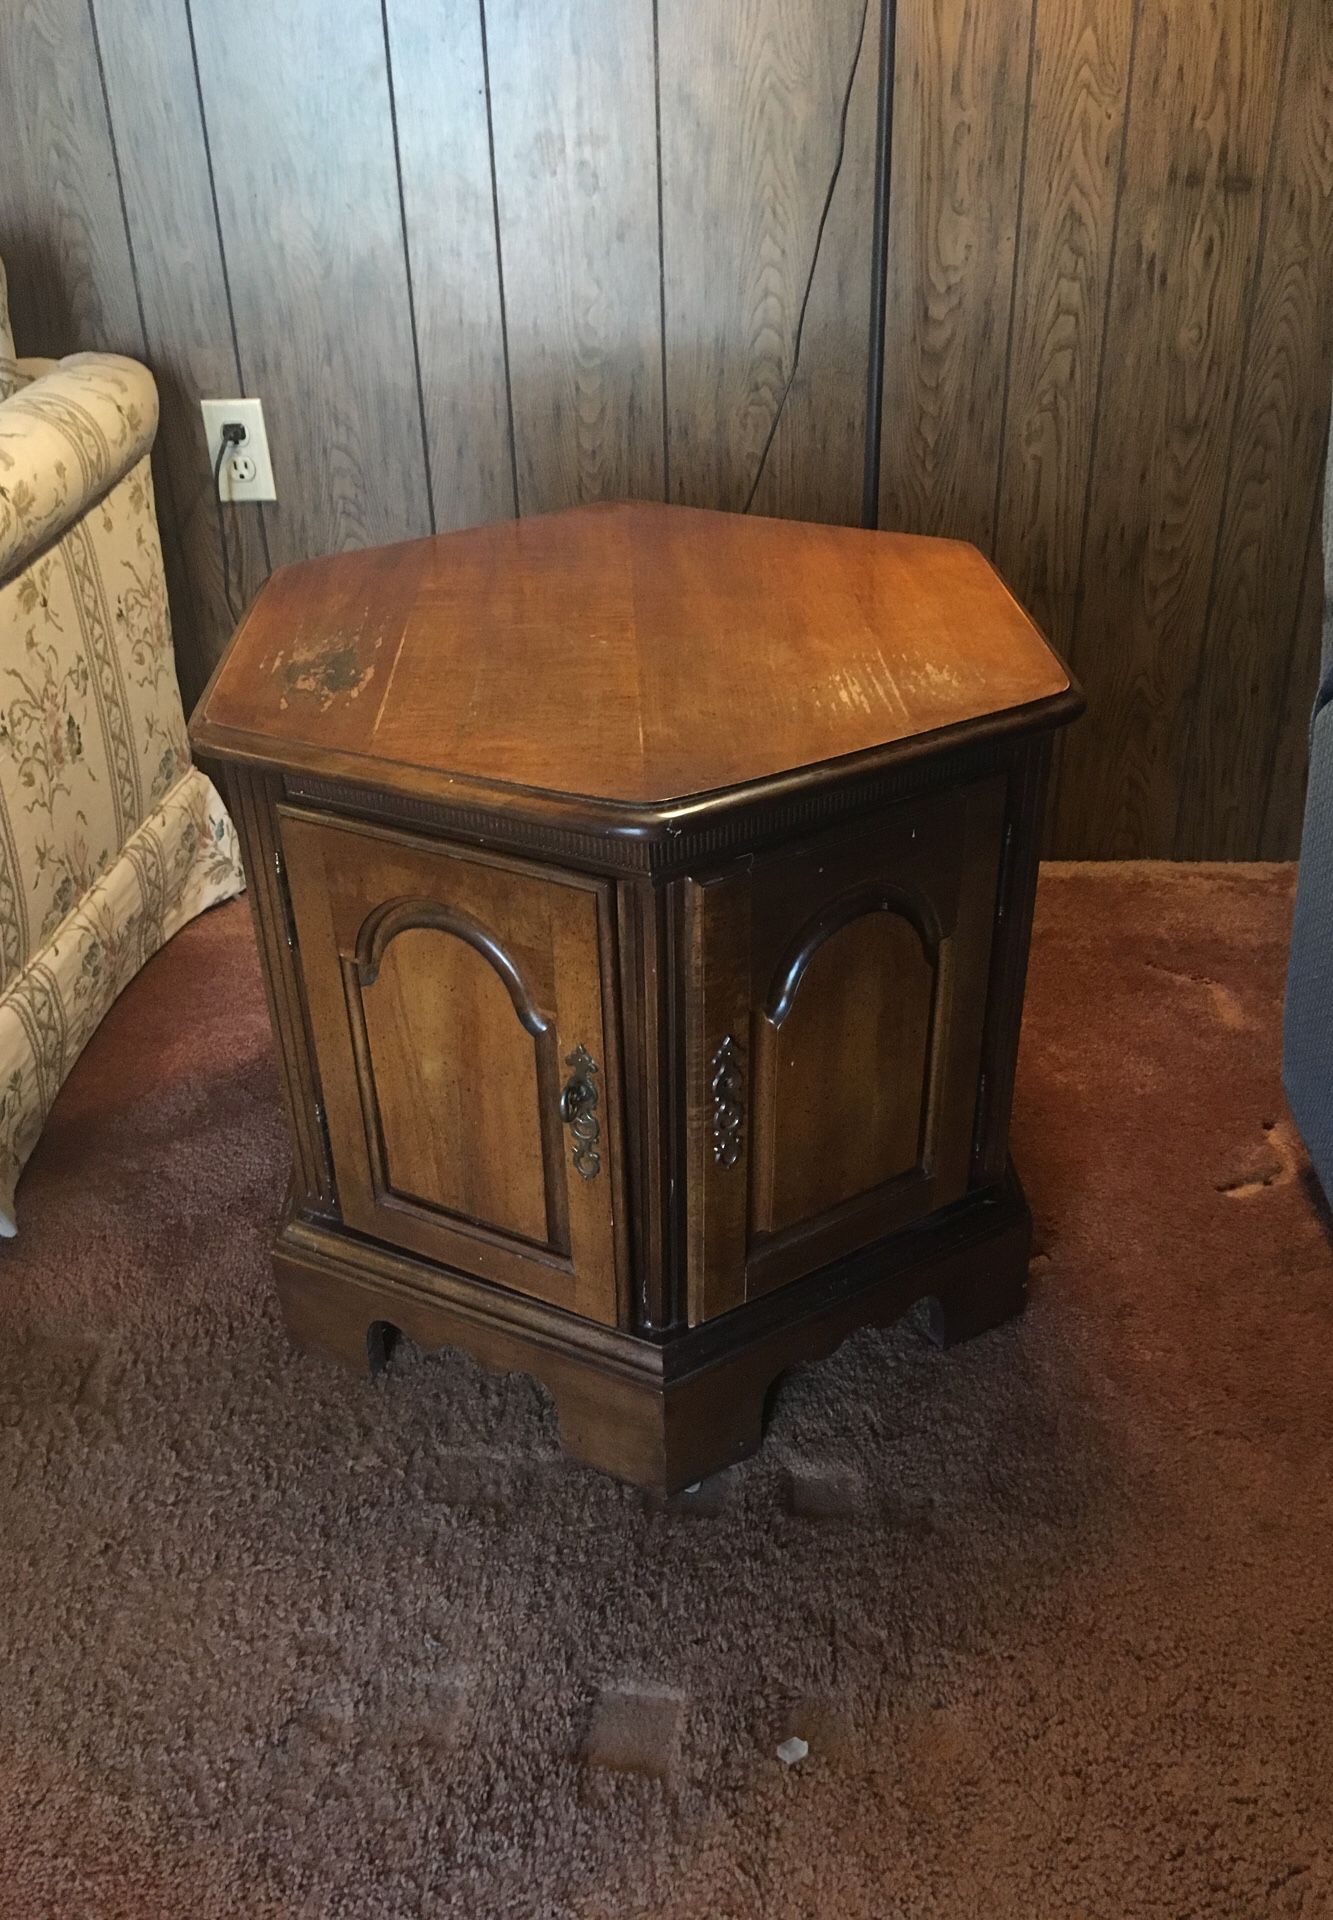 End table with storage